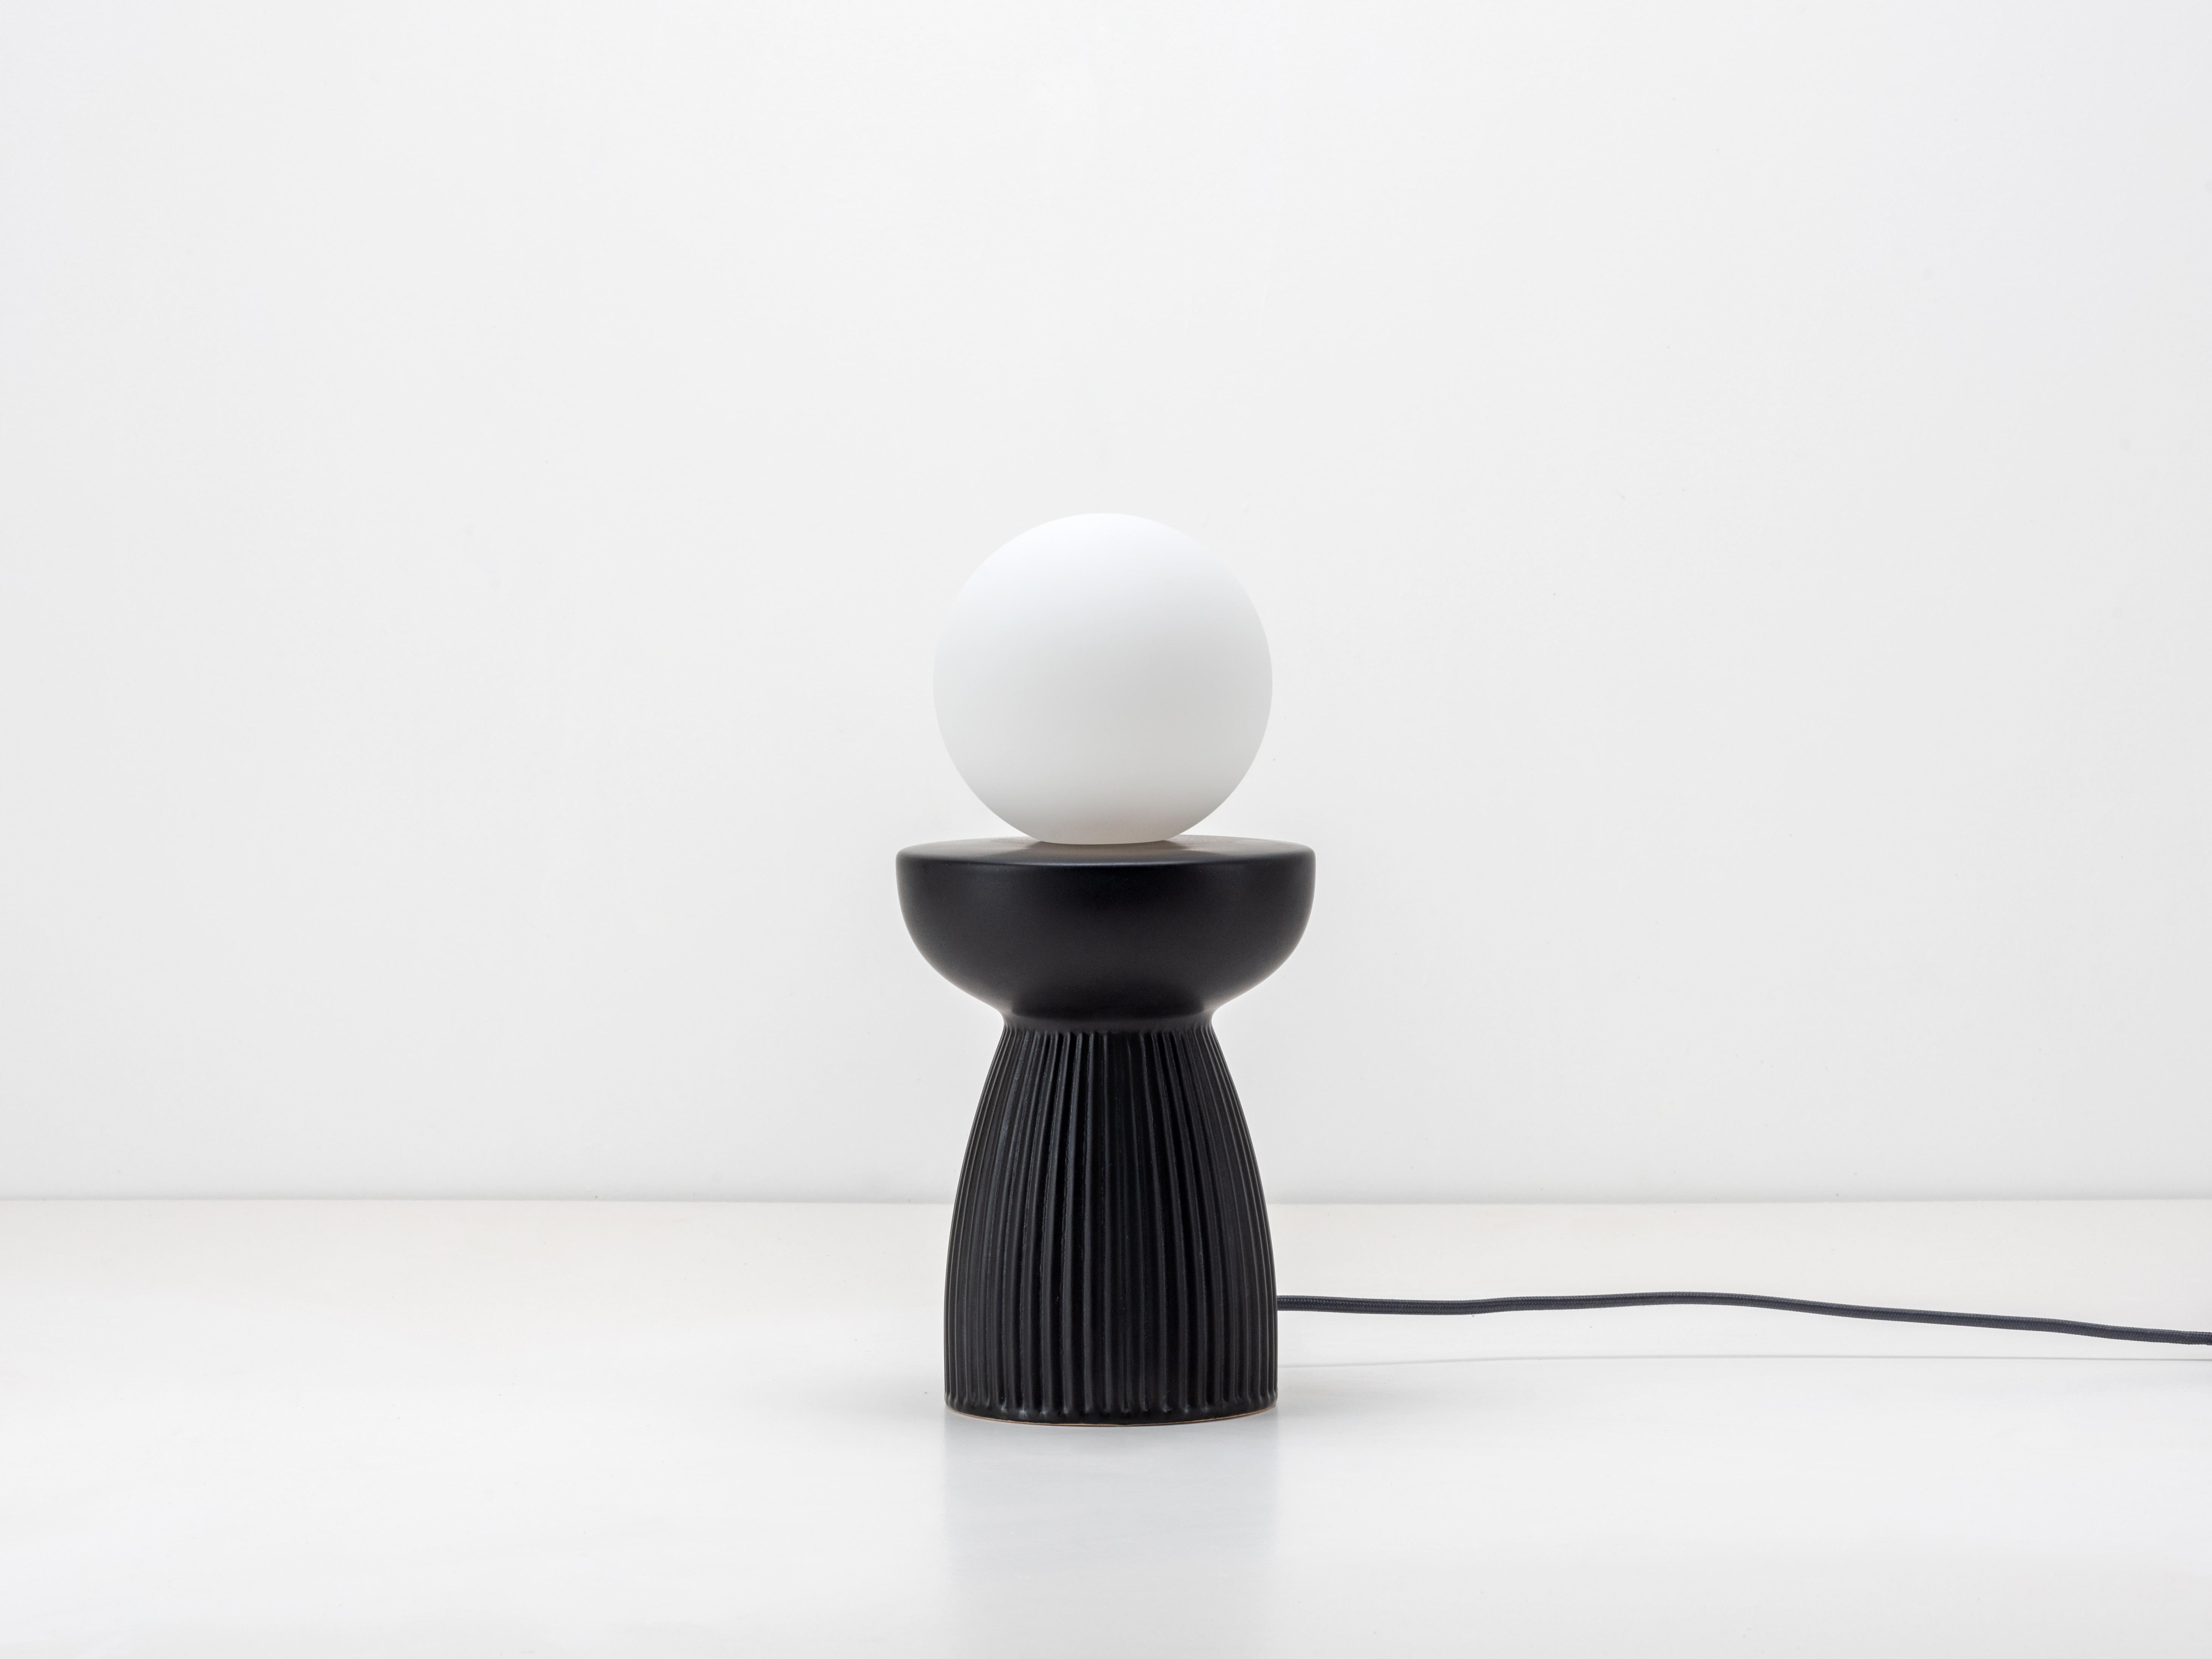 Inspired by nature, this lamp combines the tactile and cool ceramic finish with a ribbed form. Paired with our opal glass shade, it's the perfect calming light for any desk, side table or bedside. 2 year guarantee

Great lighting is about so much